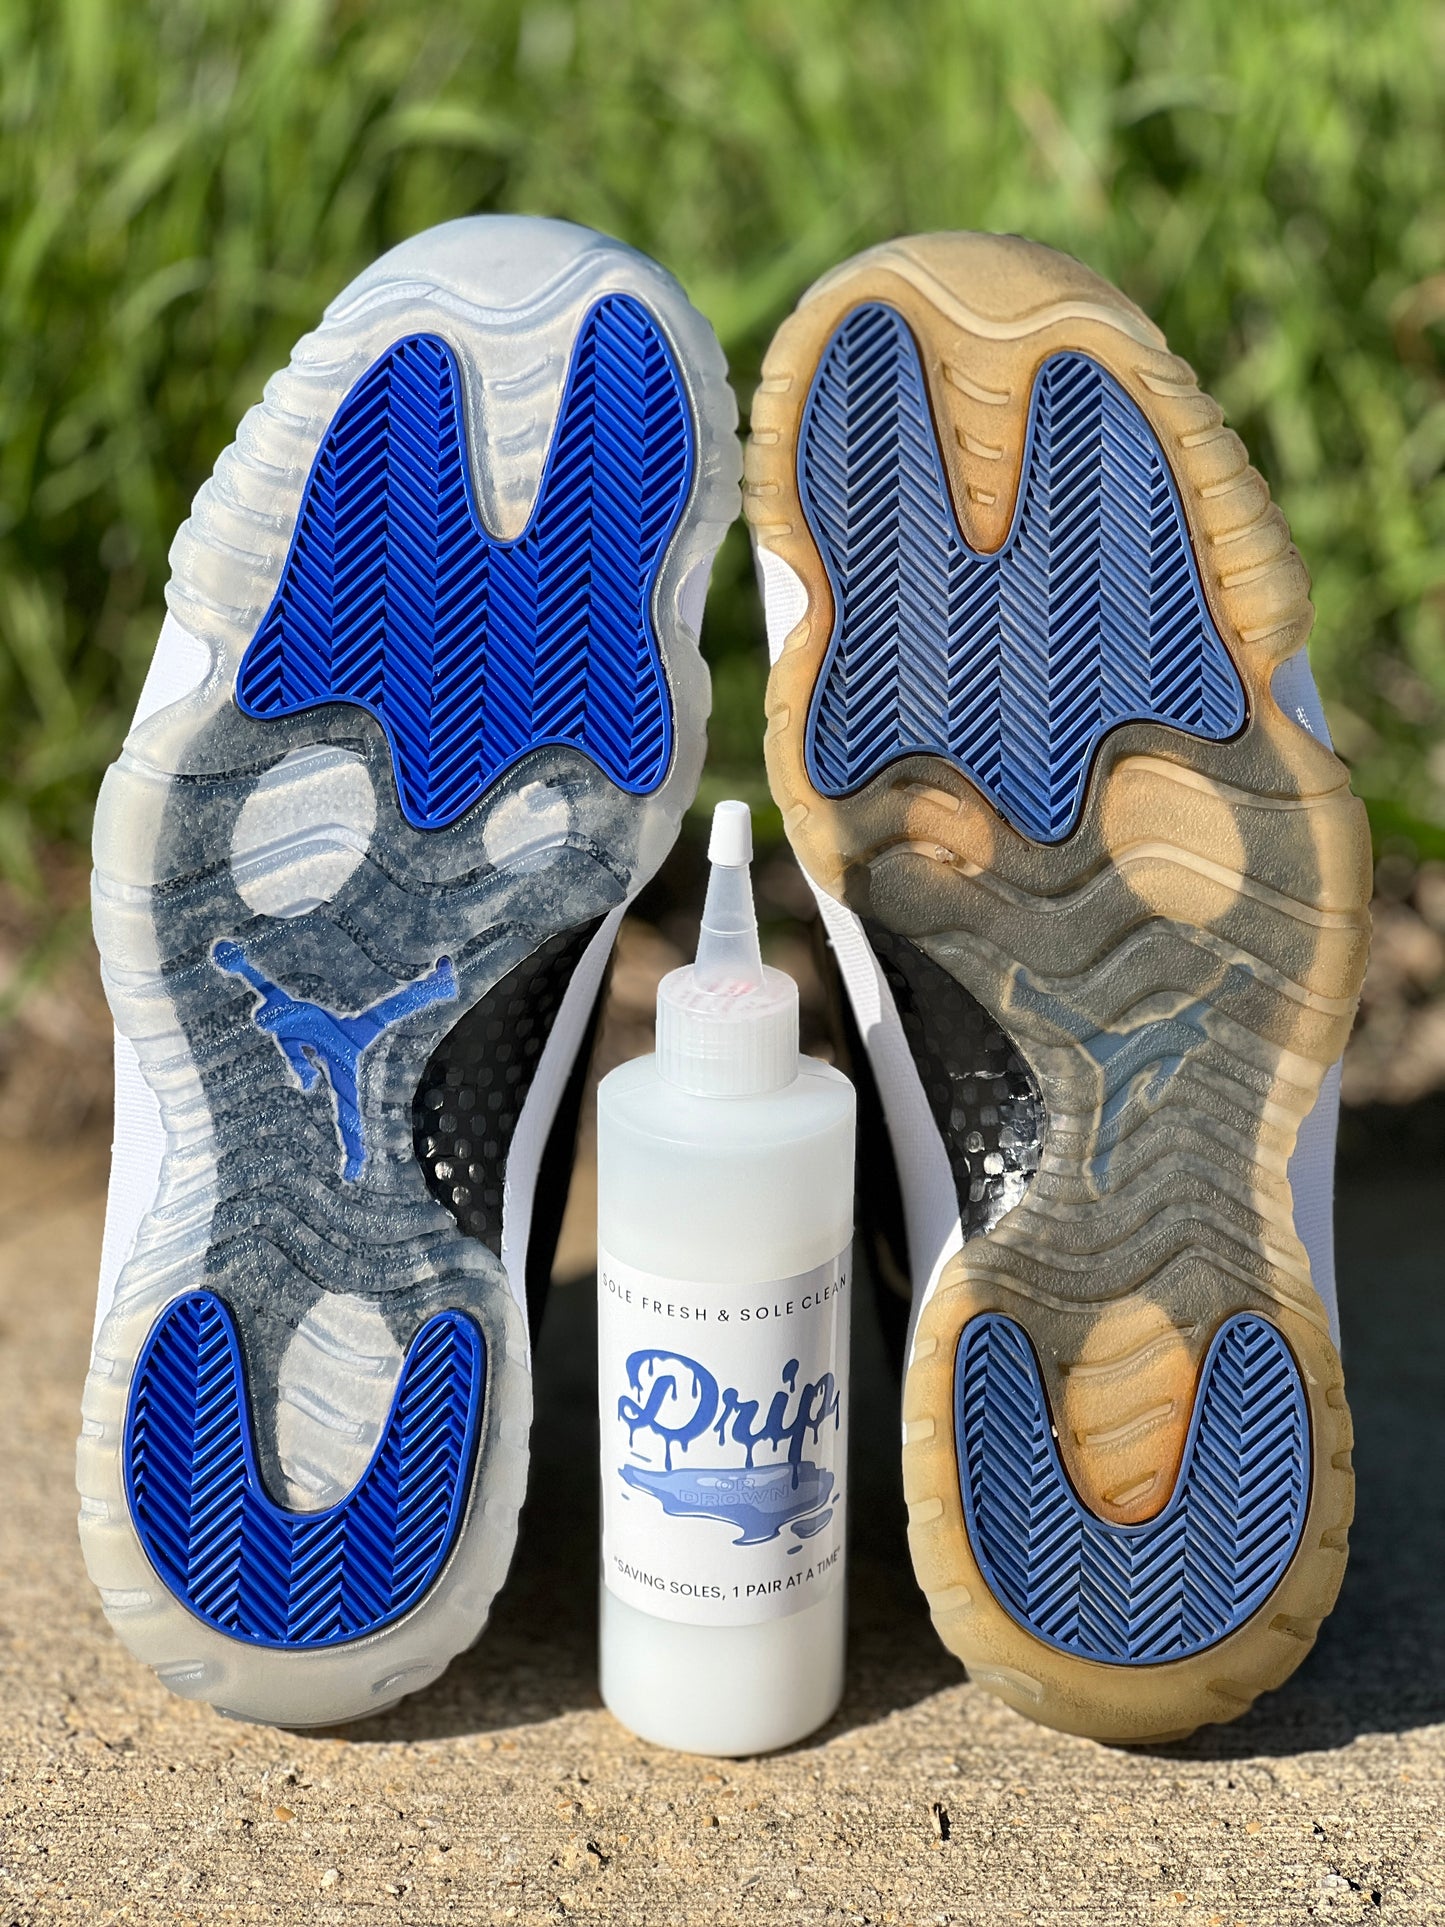 Before & after transformation of Jordan 11 Space Jam soles, once yellowed, and now restored back to looking icy and new using "Drip Sole Sauce". Use the best sole sauce for shoes, "Drip Sole Sauce", to revive sneaker soles, midsoles, and toe caps, unyellowing icy soles back to their original color. 